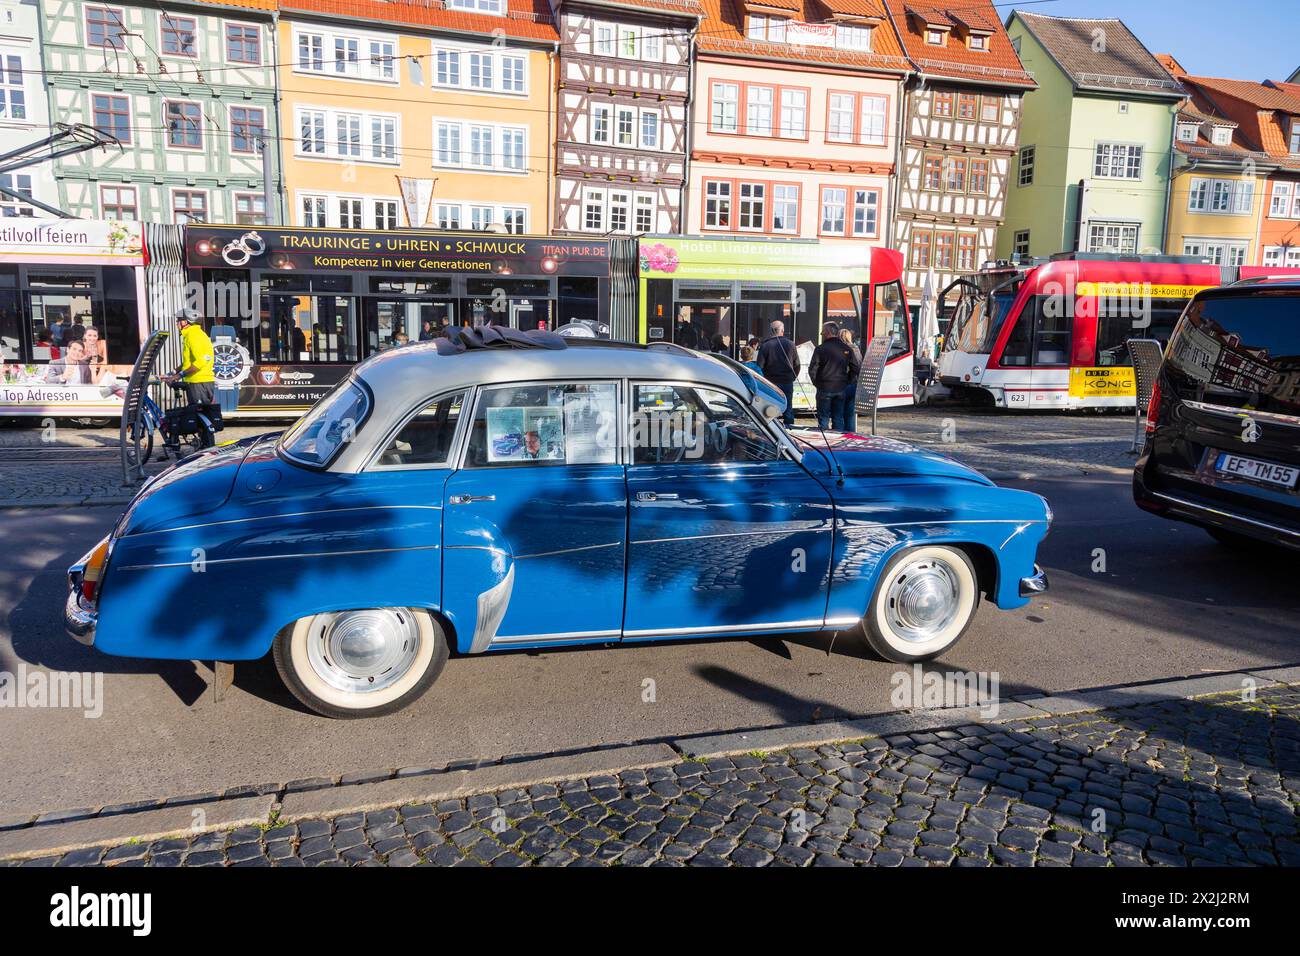 Wartburg 311, built in 1956, registered on 4 November 1957, first owner was Herbert Koefer, a well-known DEFA actor. Wartburg was the trade name of Stock Photo